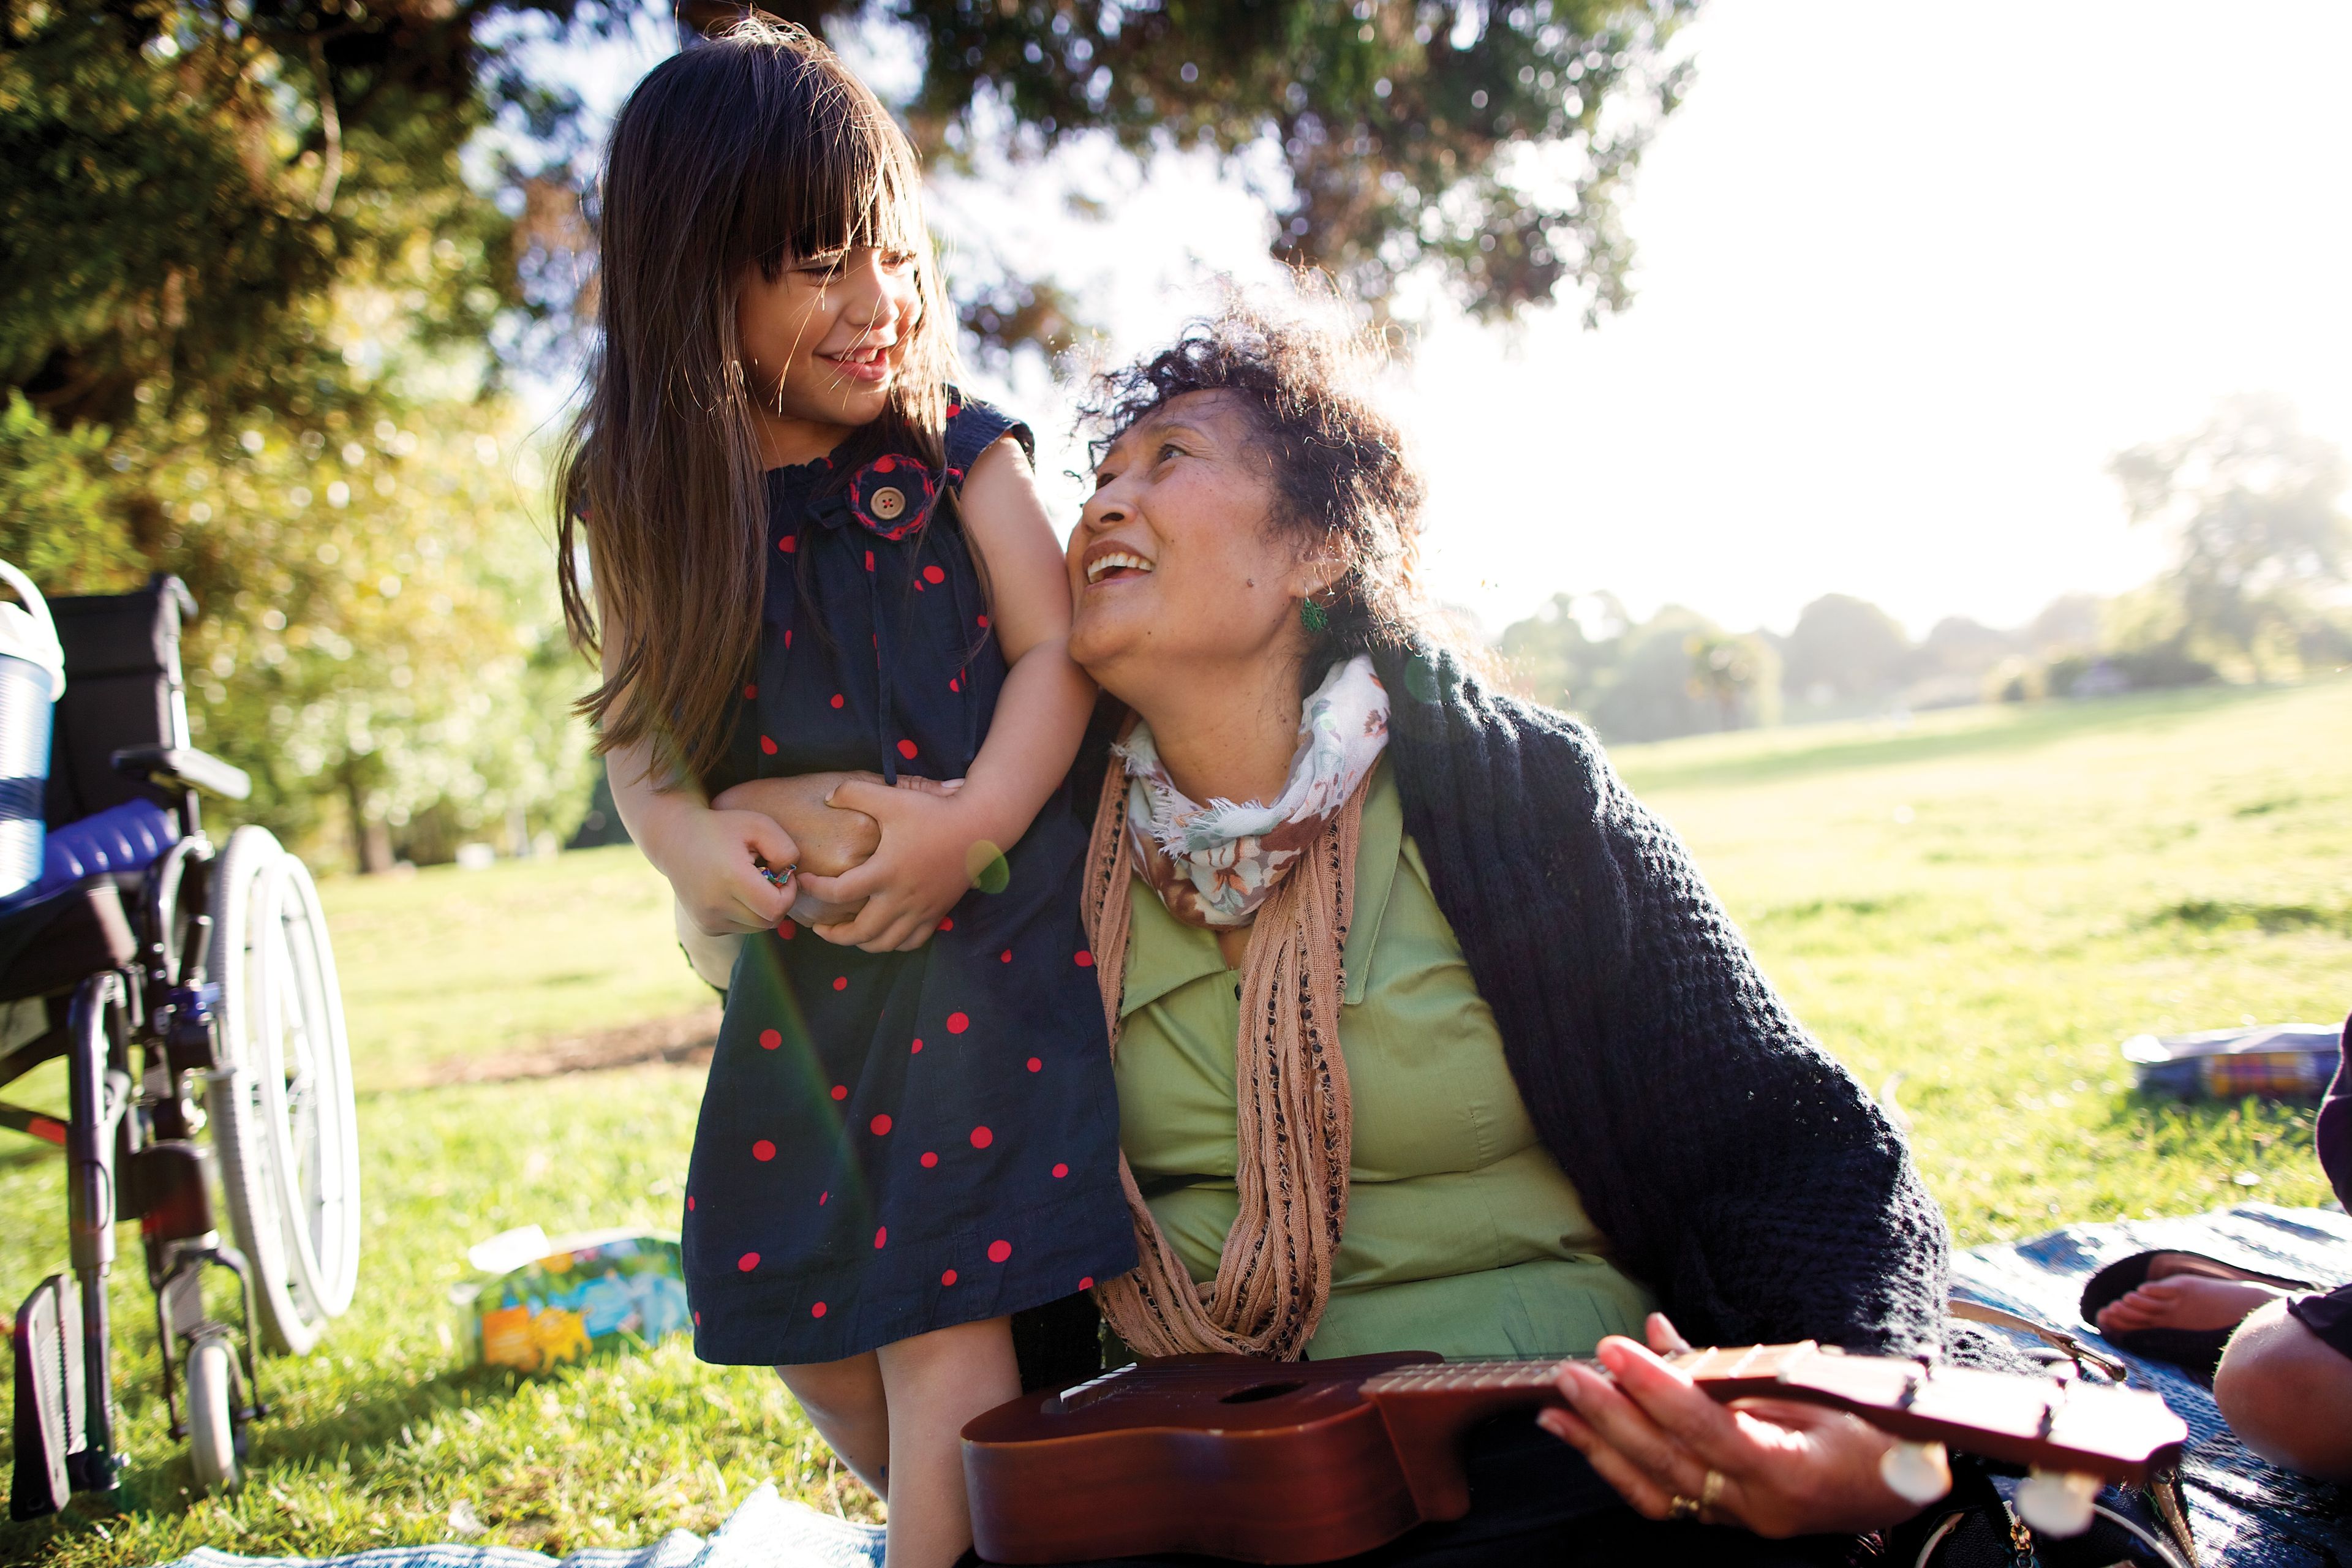 A woman and her granddaughter sitting outdoors together.